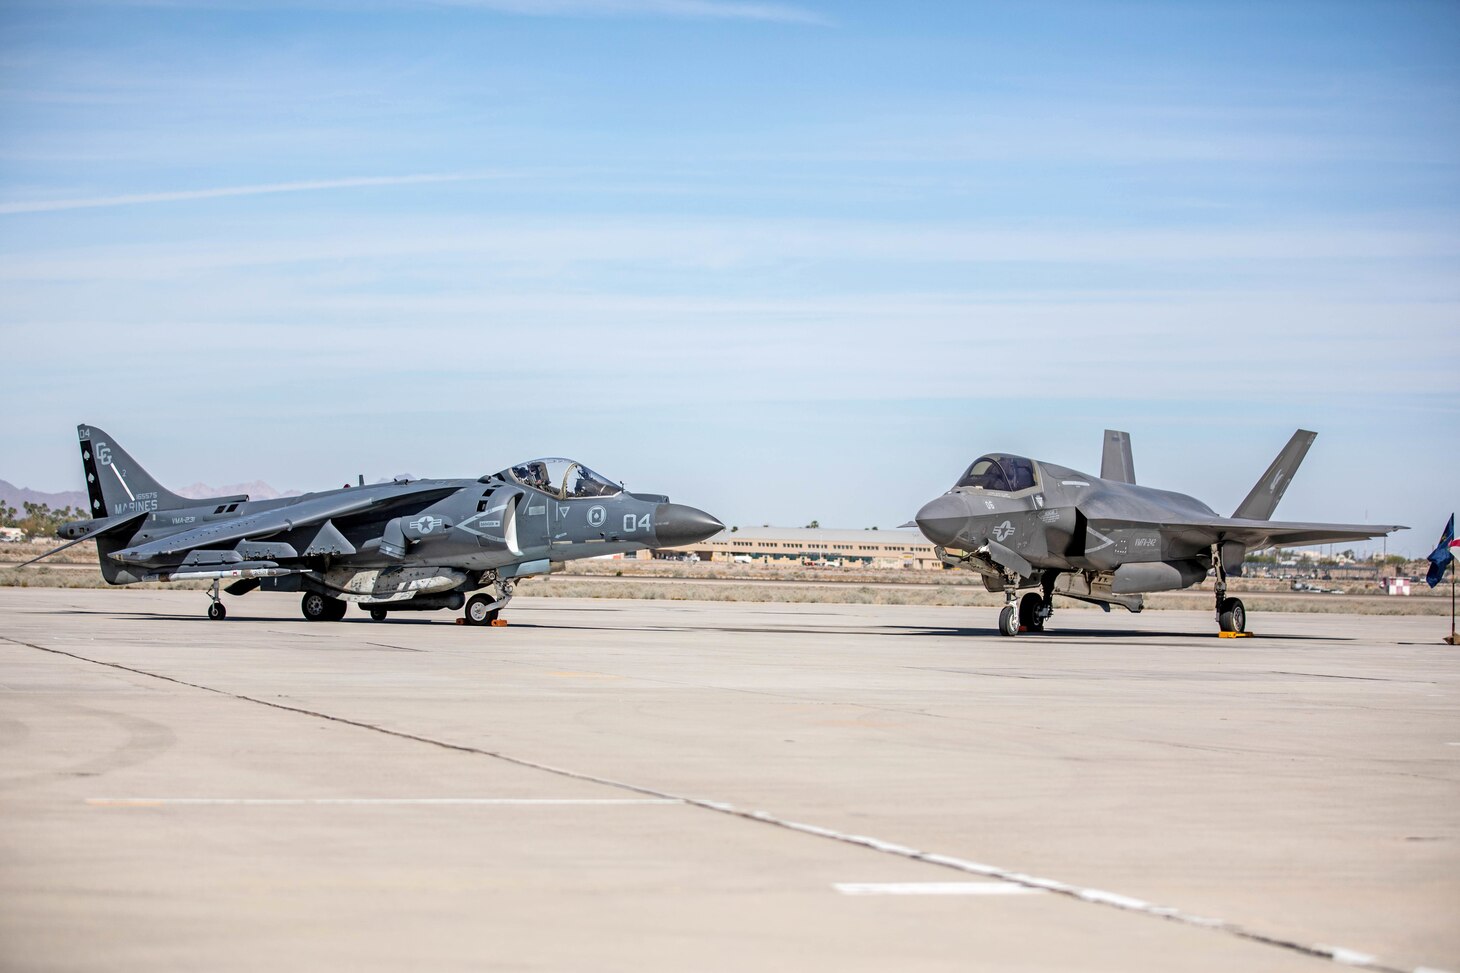 An AV-8B Harrier and an F-35B Lightning II are staged during the change of command and redesignation ceremony for Marine Fighter Attack Squadron (VMFA) 214 aboard Marine Corps Air Station Yuma, Arizona, March, 25, 2022. As part of the transition from the AV-8B Harrier to the F-35B Lightning II, Marine Attack Squadron 214 was re-designated as VMFA-214. The F-35B Lightning II is replacing the AV-8B Harrier to introduce unmatched capabilities to the Marine Corps. The F-35B Lightning II represents a leap forward in air dominance by providing the operational agility and tactical supremacy Marines need to provide expeditious and lethal support.